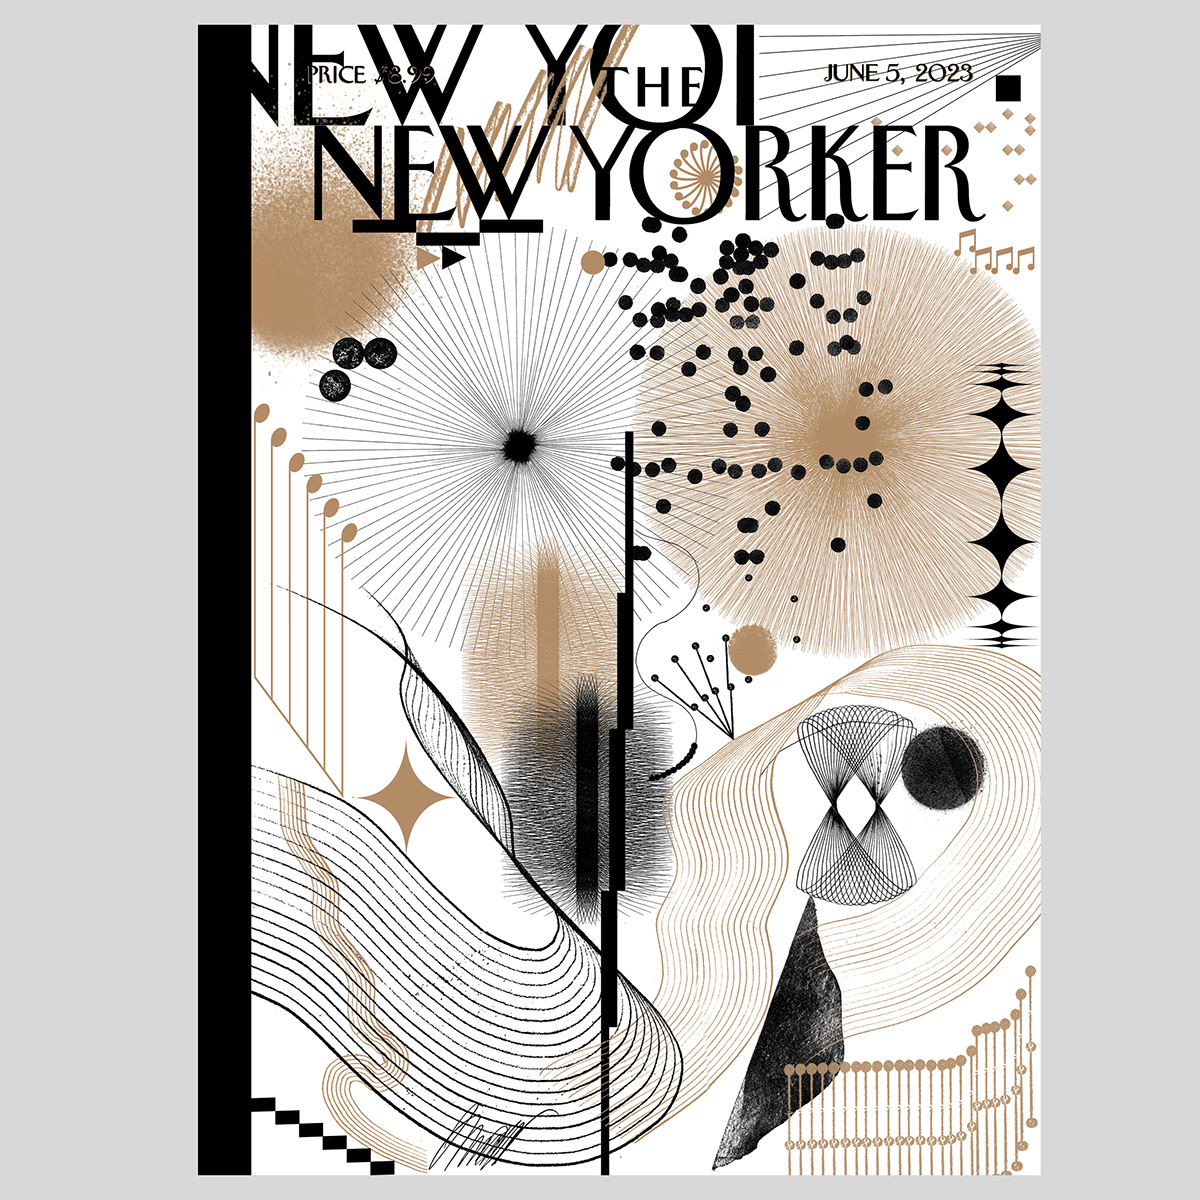 music New Yorker Cover synesthesia rhythms interactive motion design